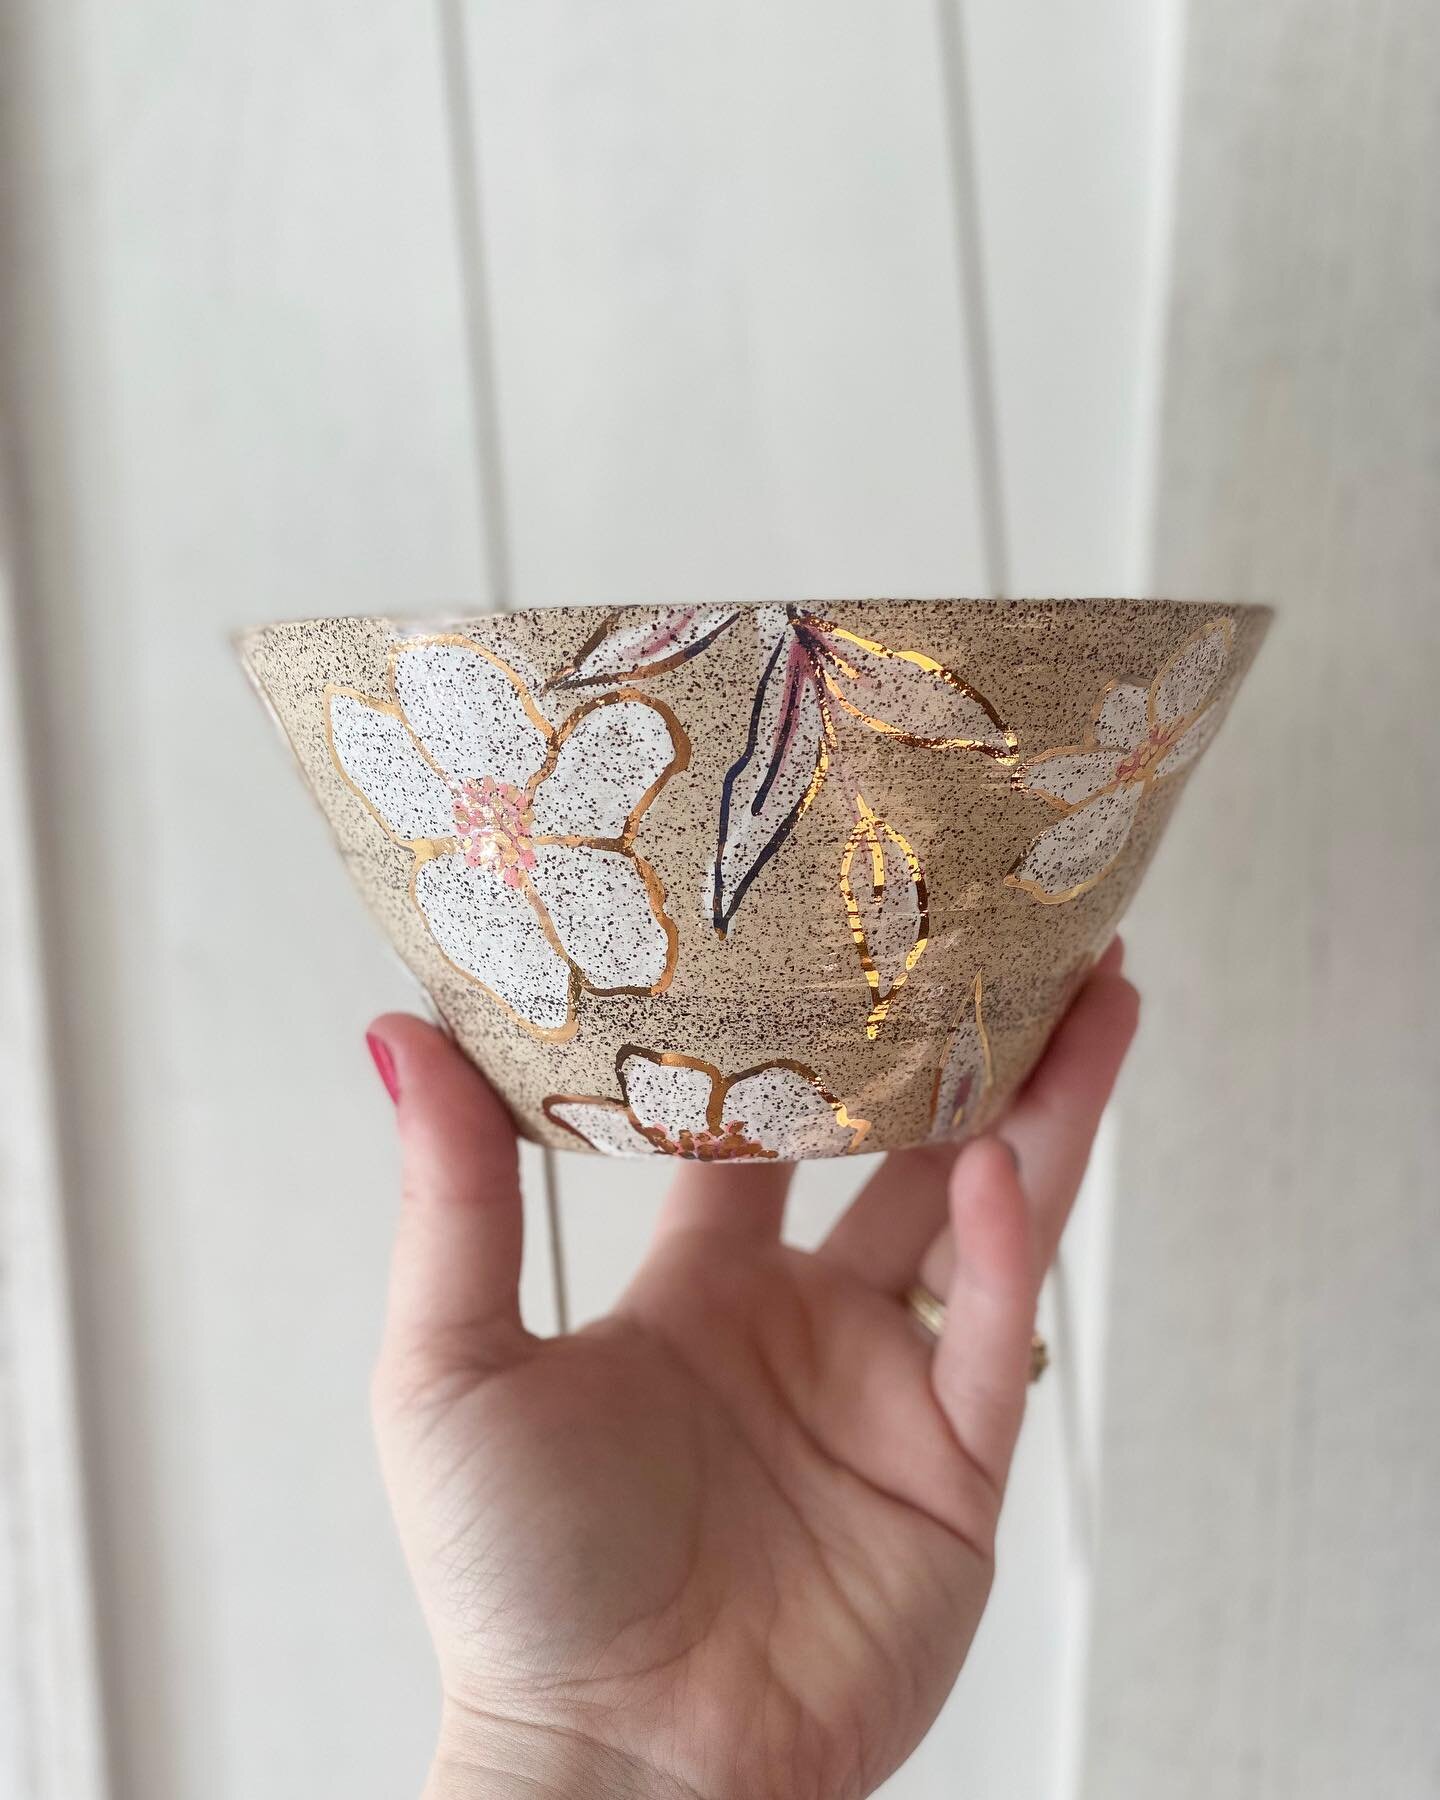 RESTOCK IS LIVE!!!! Go snag something ✨
.
.
.
#clayallday #localartist #tallahasseeart #thatsdarling #handthrownpottery #pottery #potterhead #gold #golddetail #floraldesign #floral